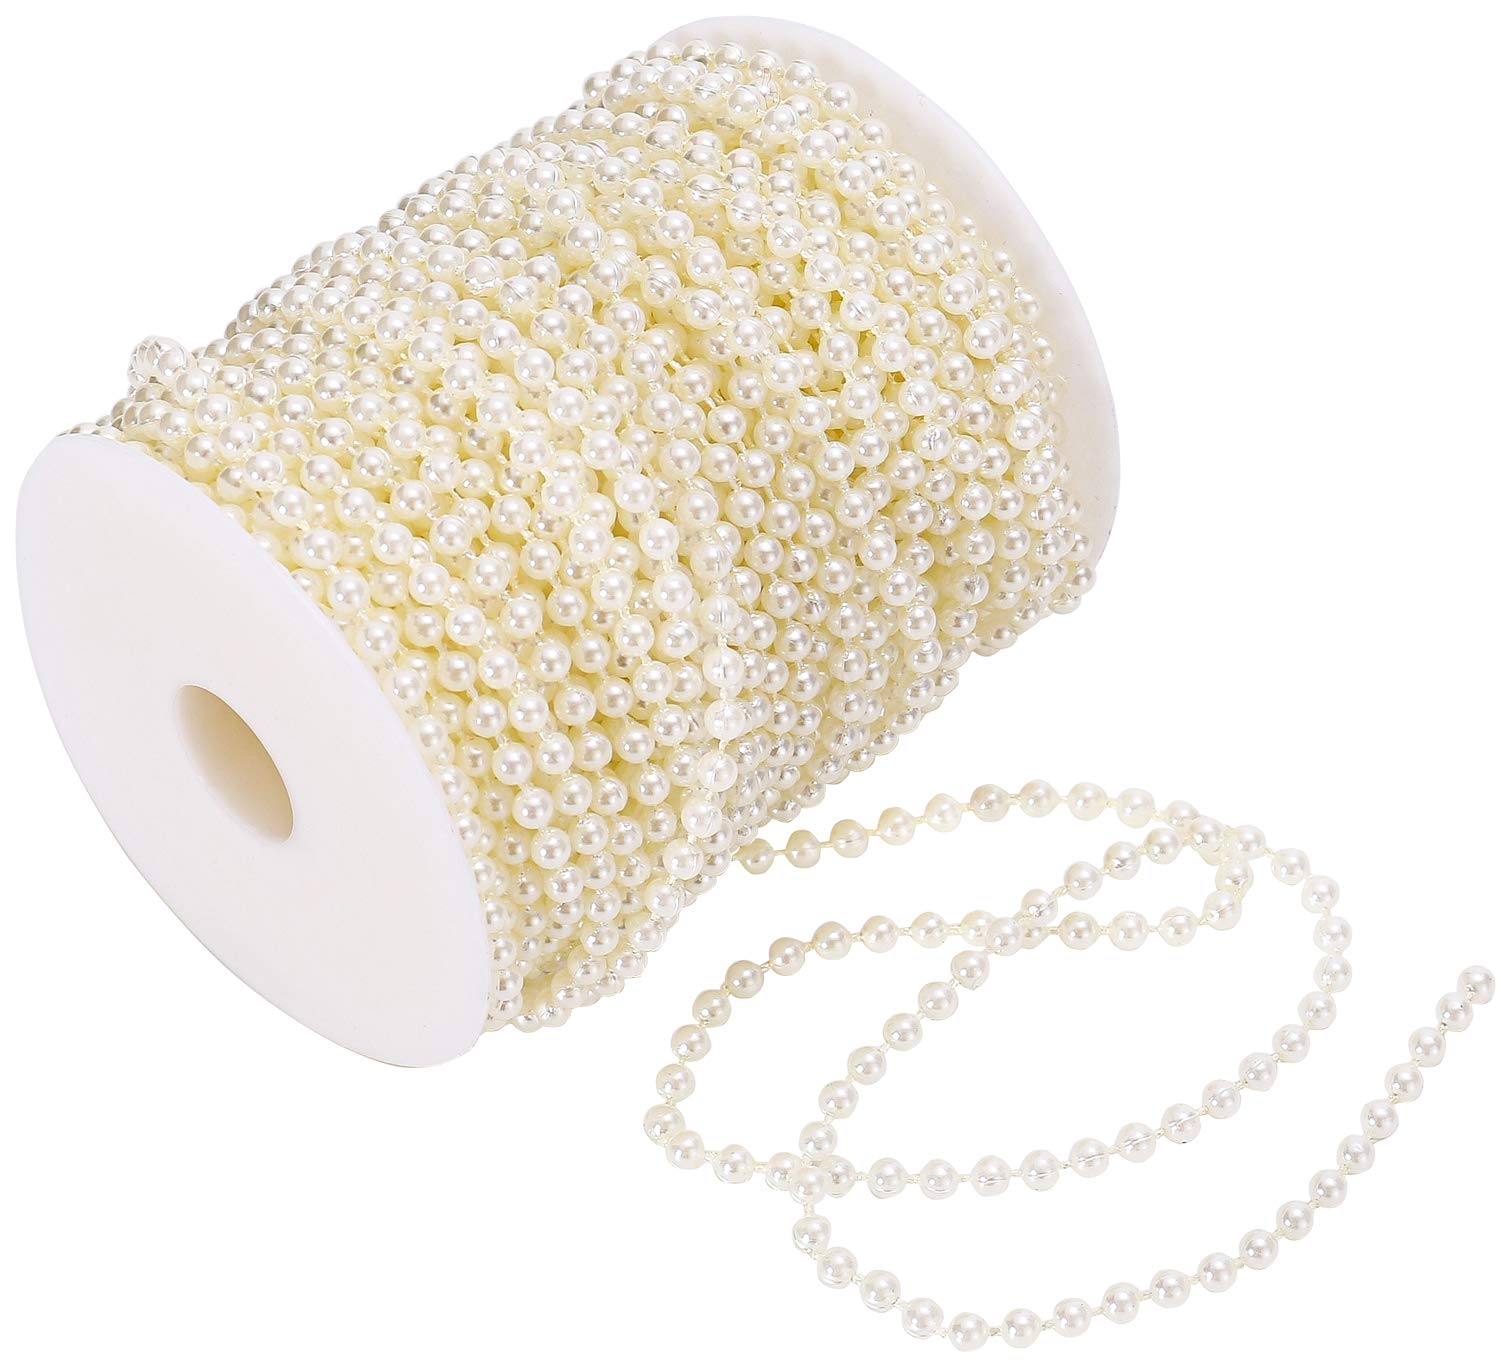 Sooyee 5mm Faux Pearl Beads Decorative Beads Garland Pearl Bead